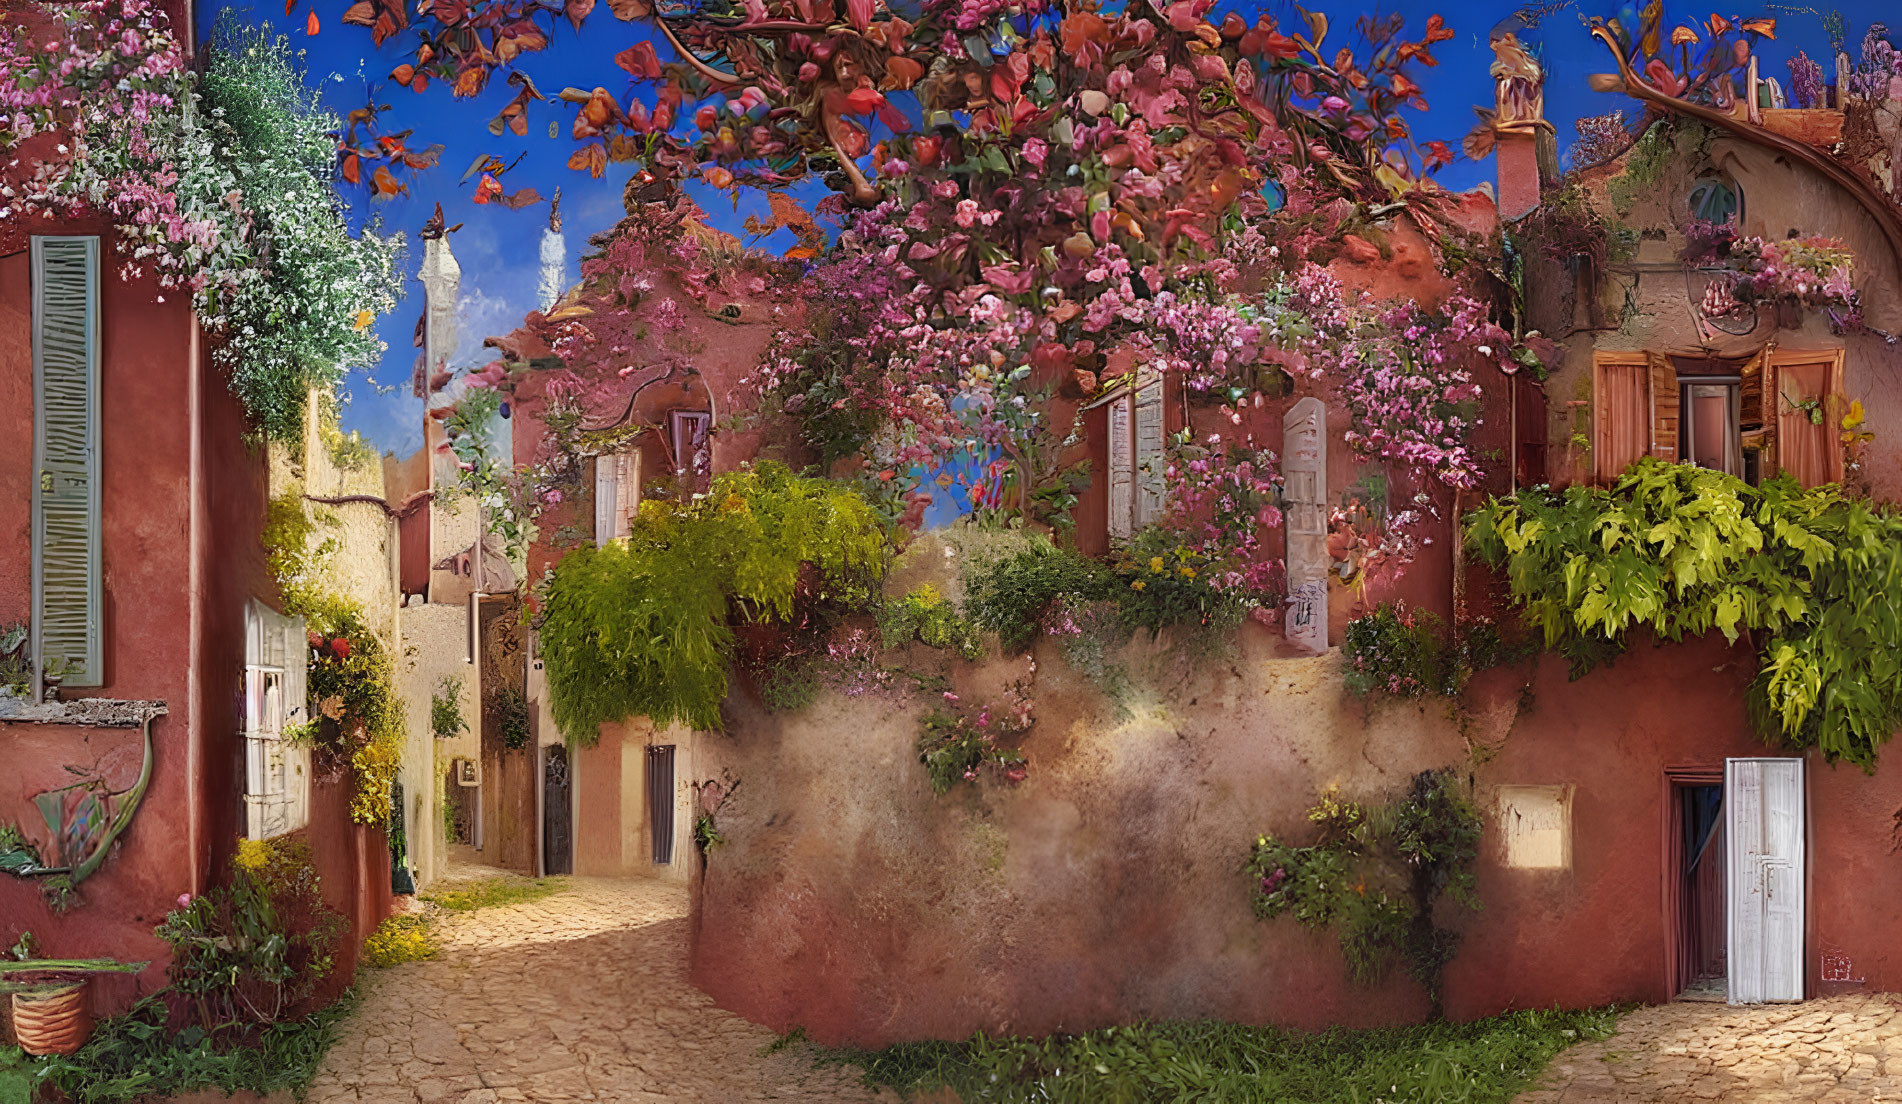 Charming cobblestone street with vibrant flowers and terracotta walls